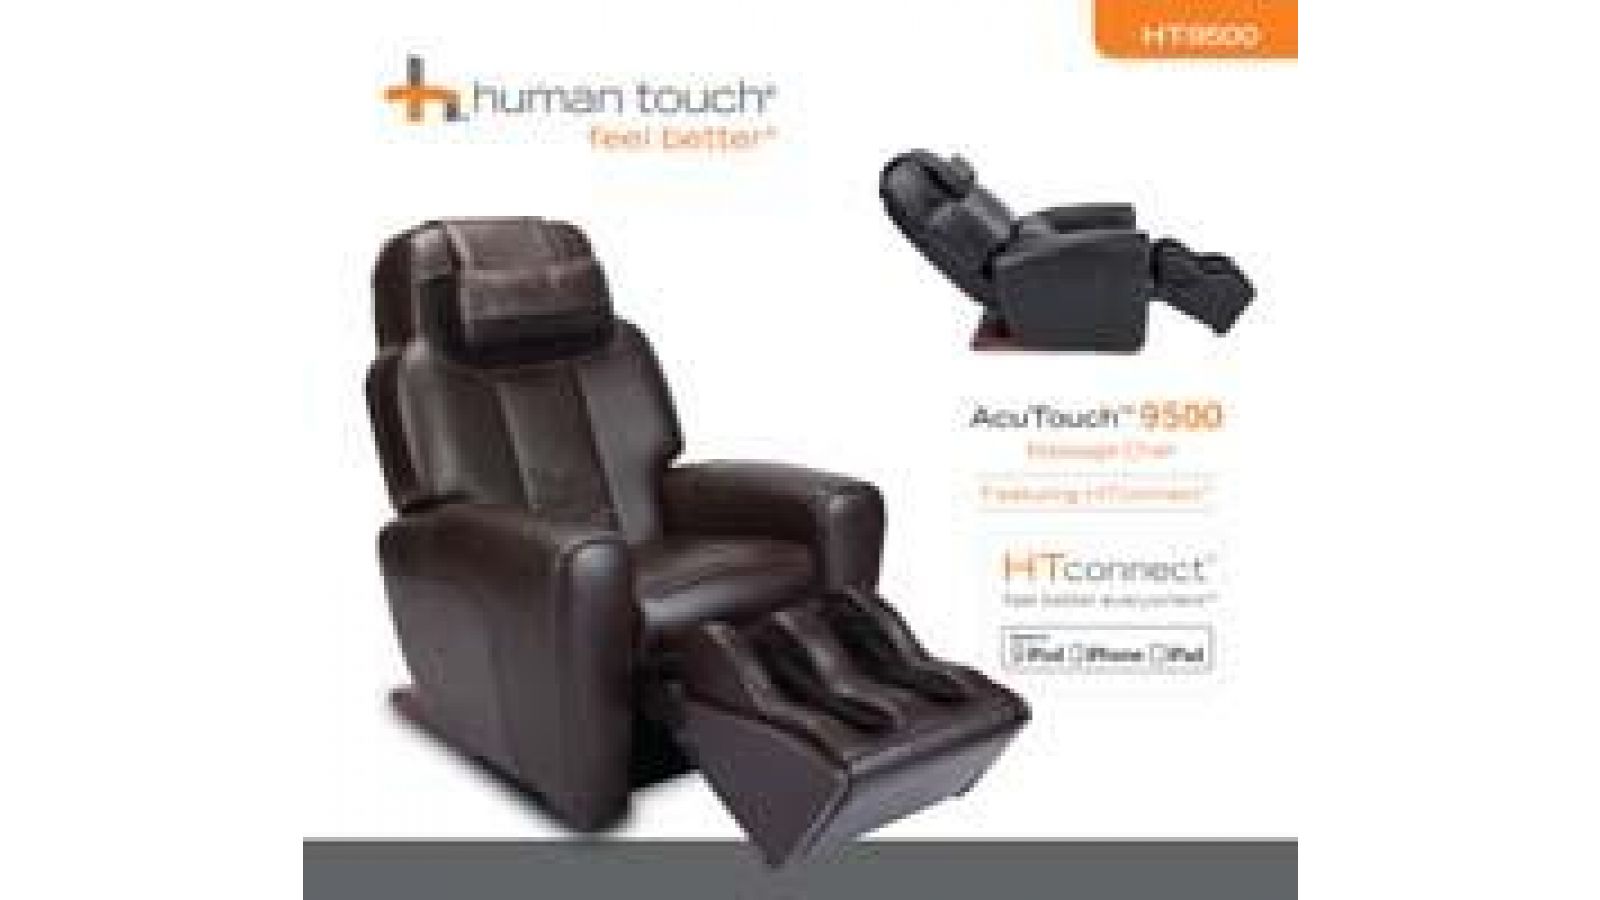 AcuTouch 9500 Massage Chair Featuring HT-Connect